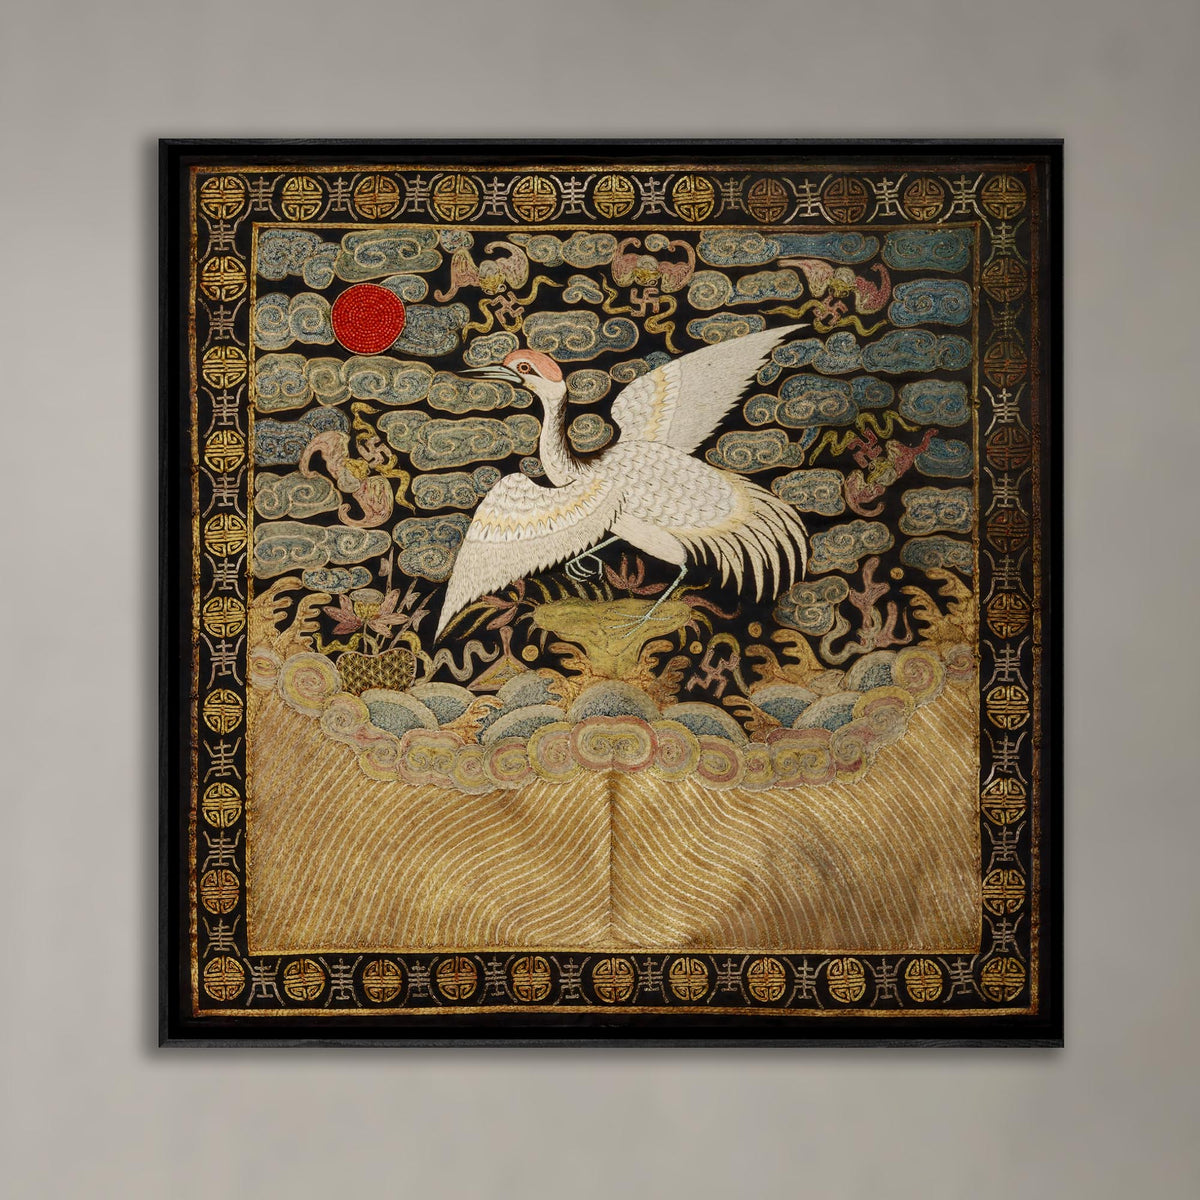 Framed Print 12&quot;x12&quot; / Black Frame Qing Dynasty, Chinese Silk Embroidery Heron Mandarin Bird Square Antique Asian Vintage Framed Art Print